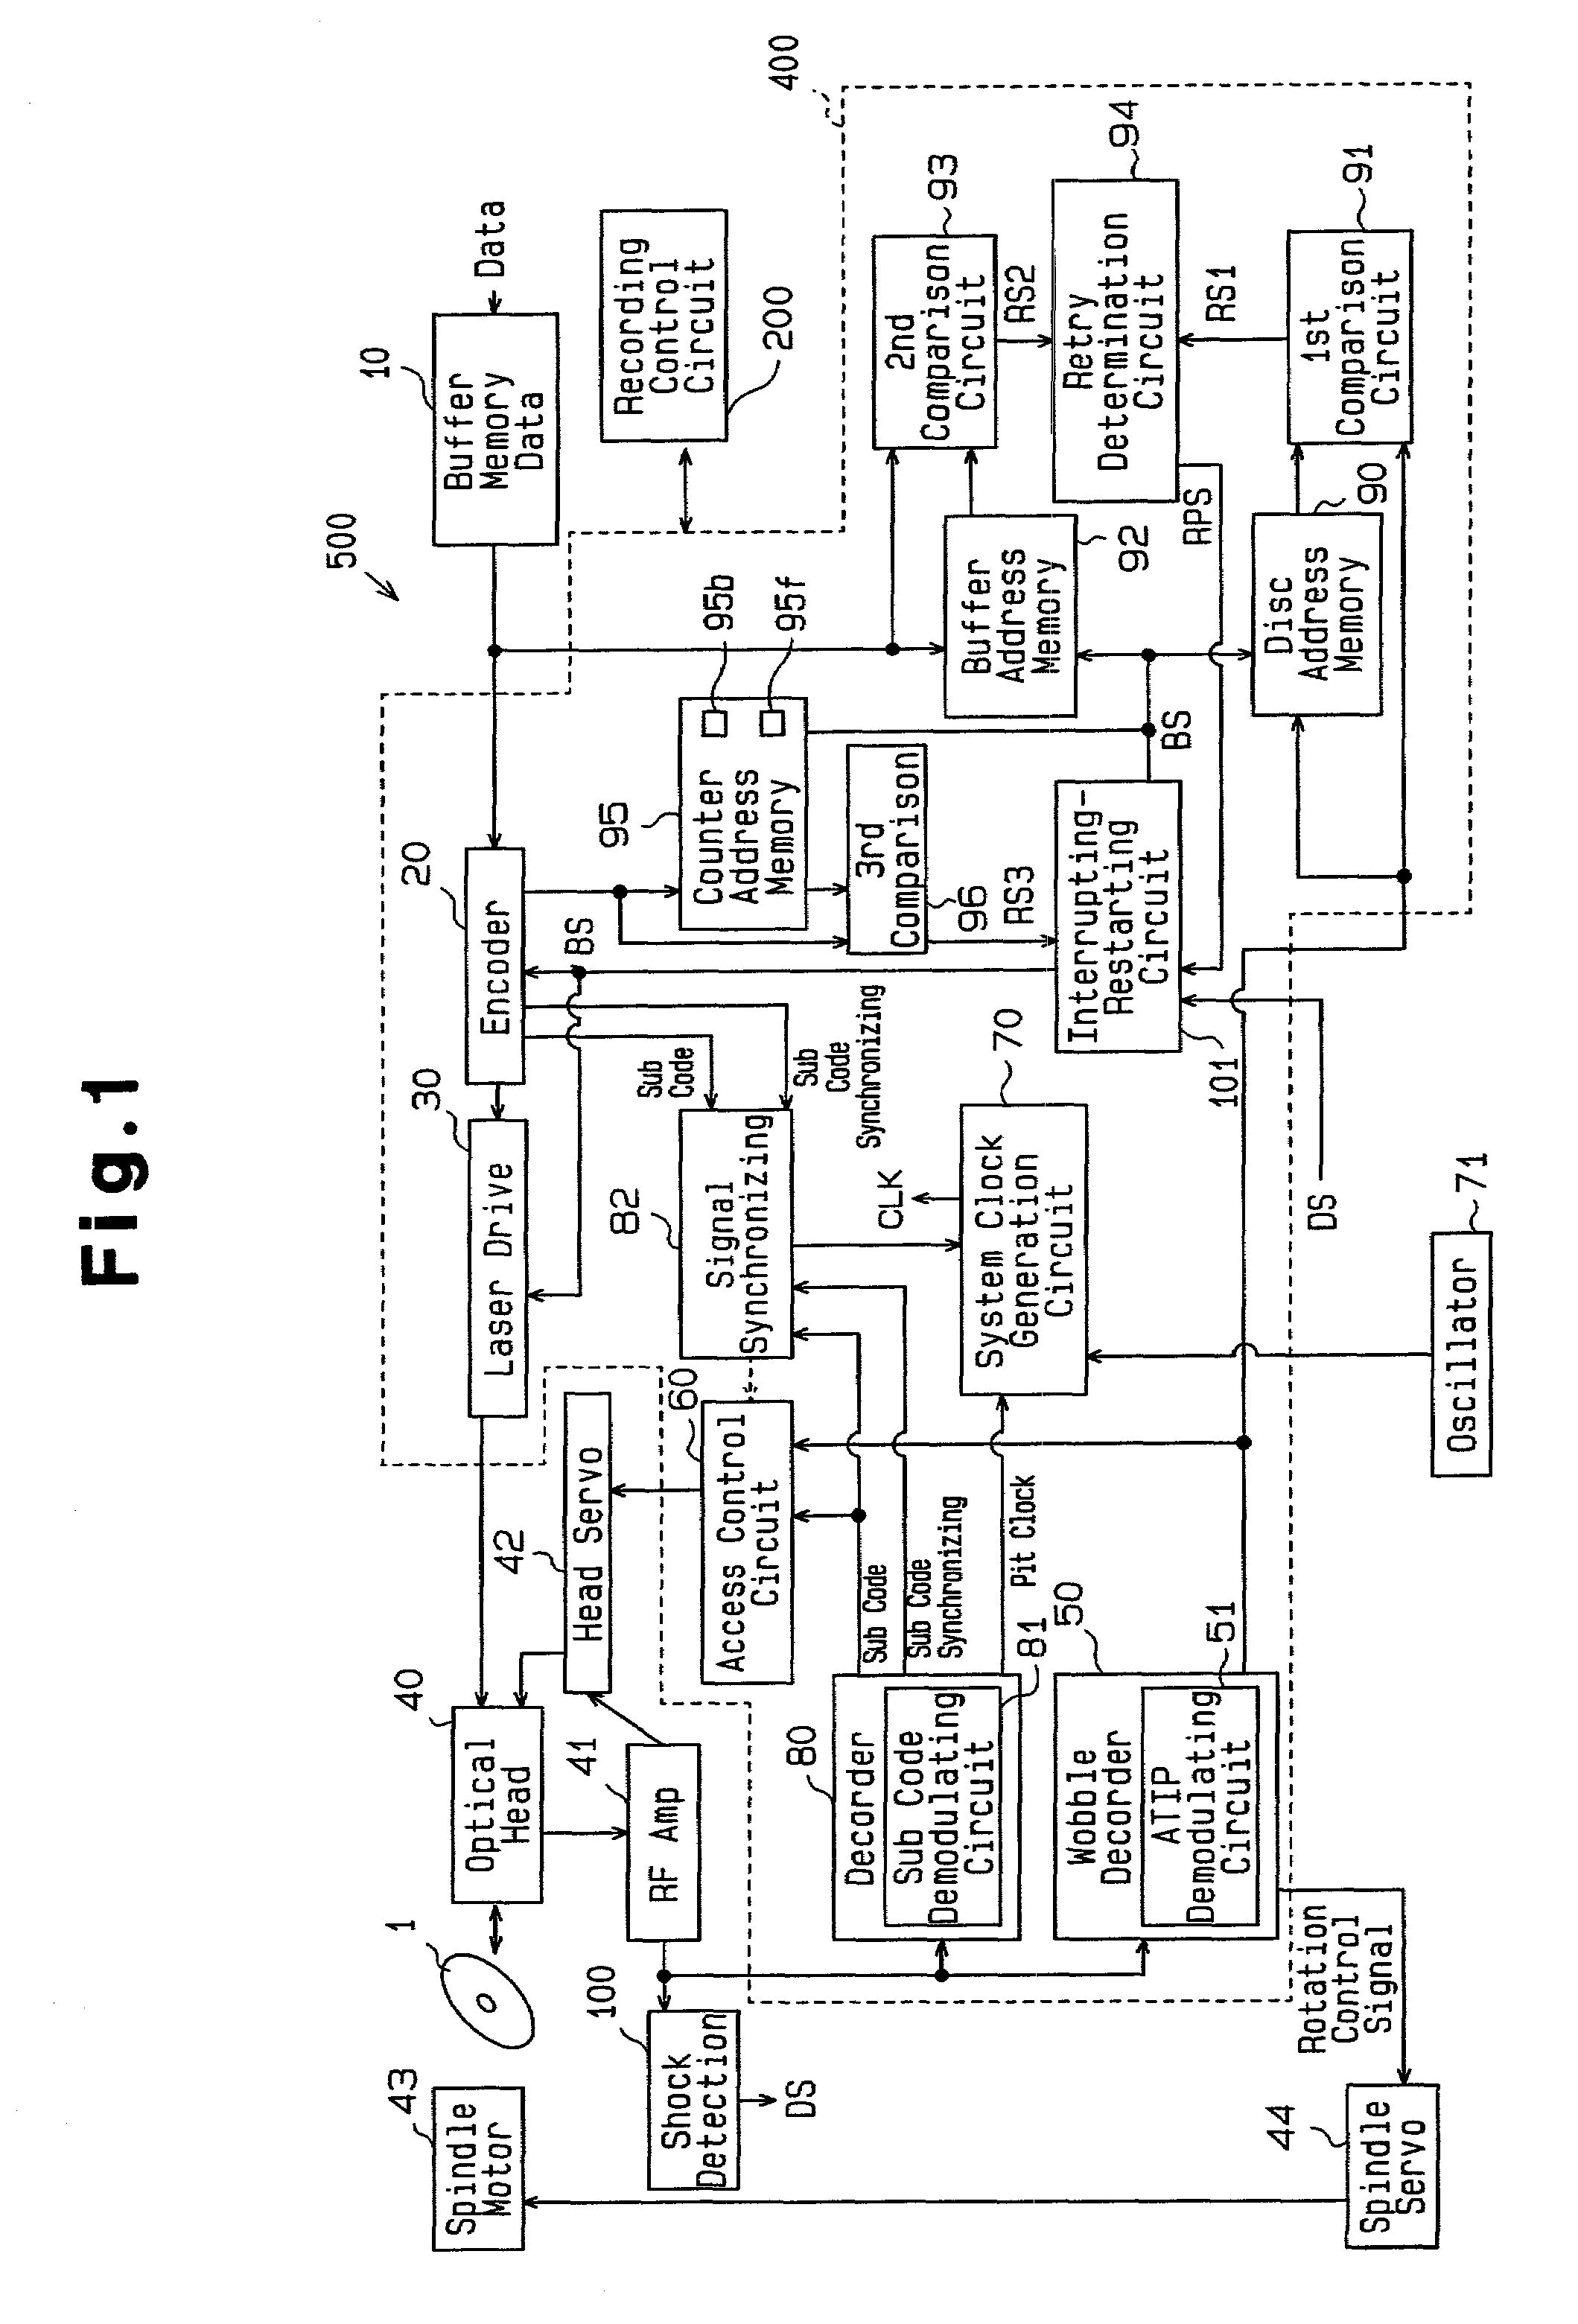 Method and apparatus for recording data on an optical disc with restarting writing of data after data recording interruption